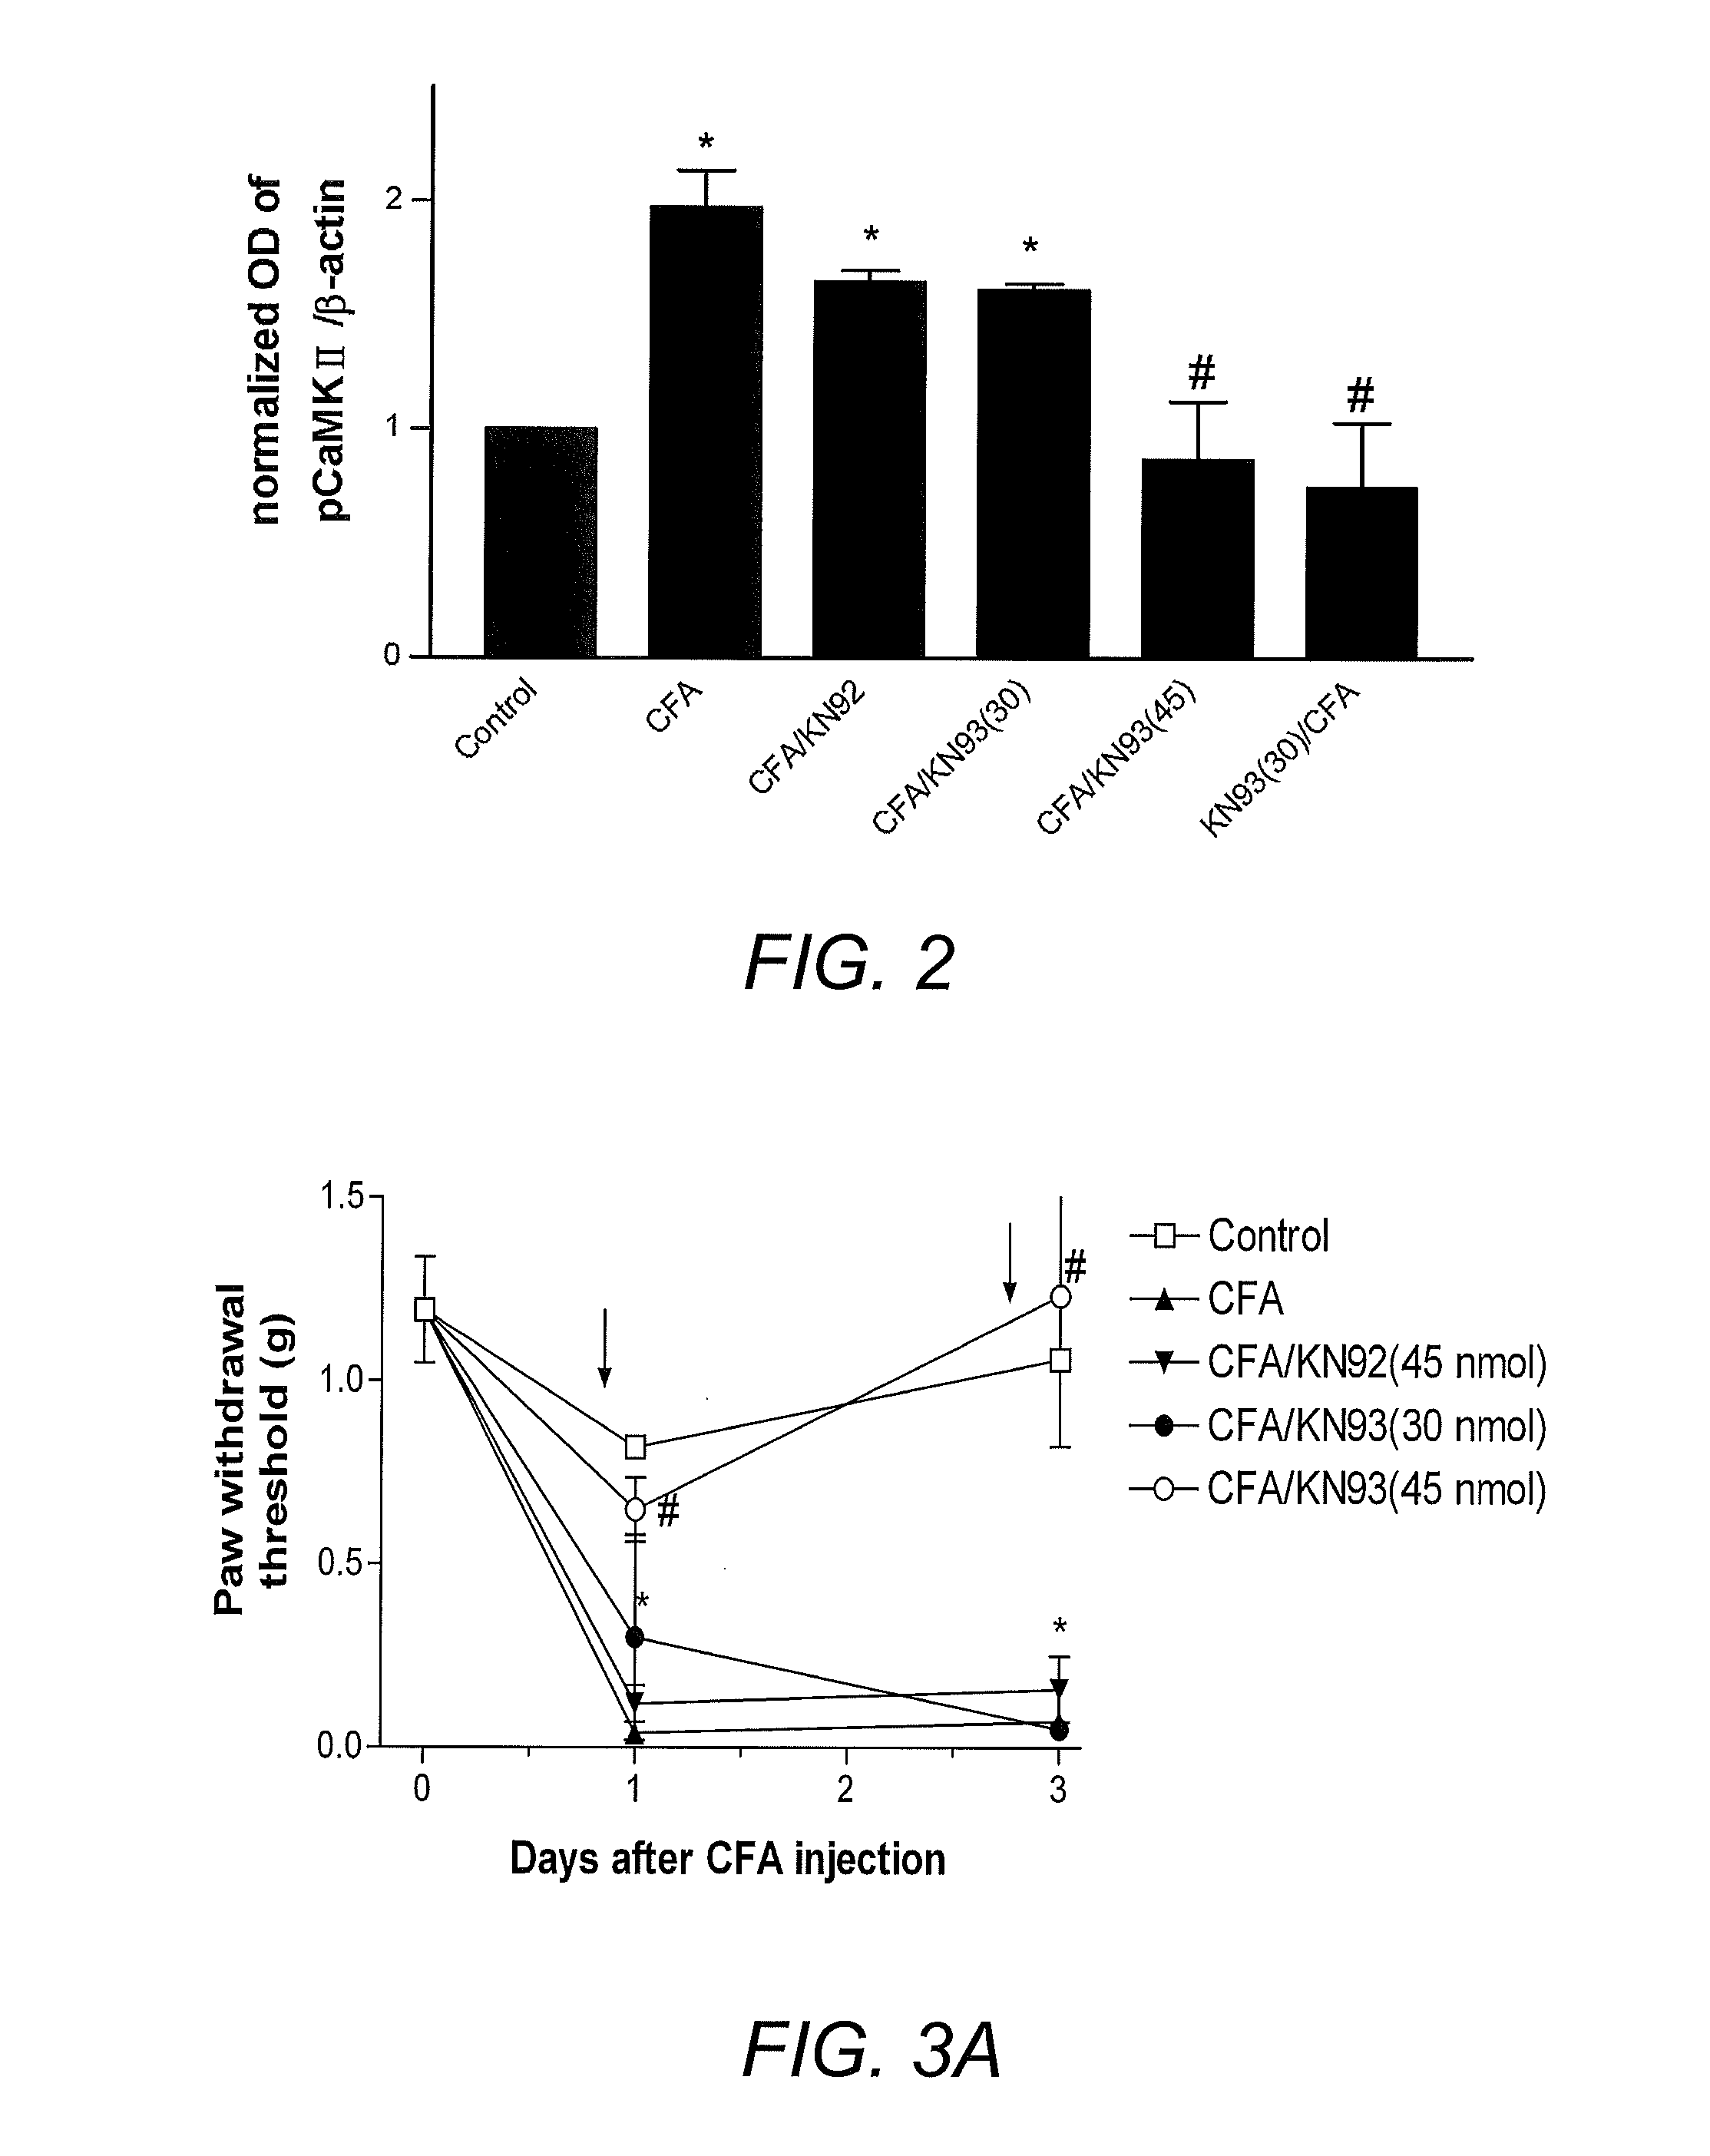 Method for Treating Pain with a Calmodulin Inhibitor